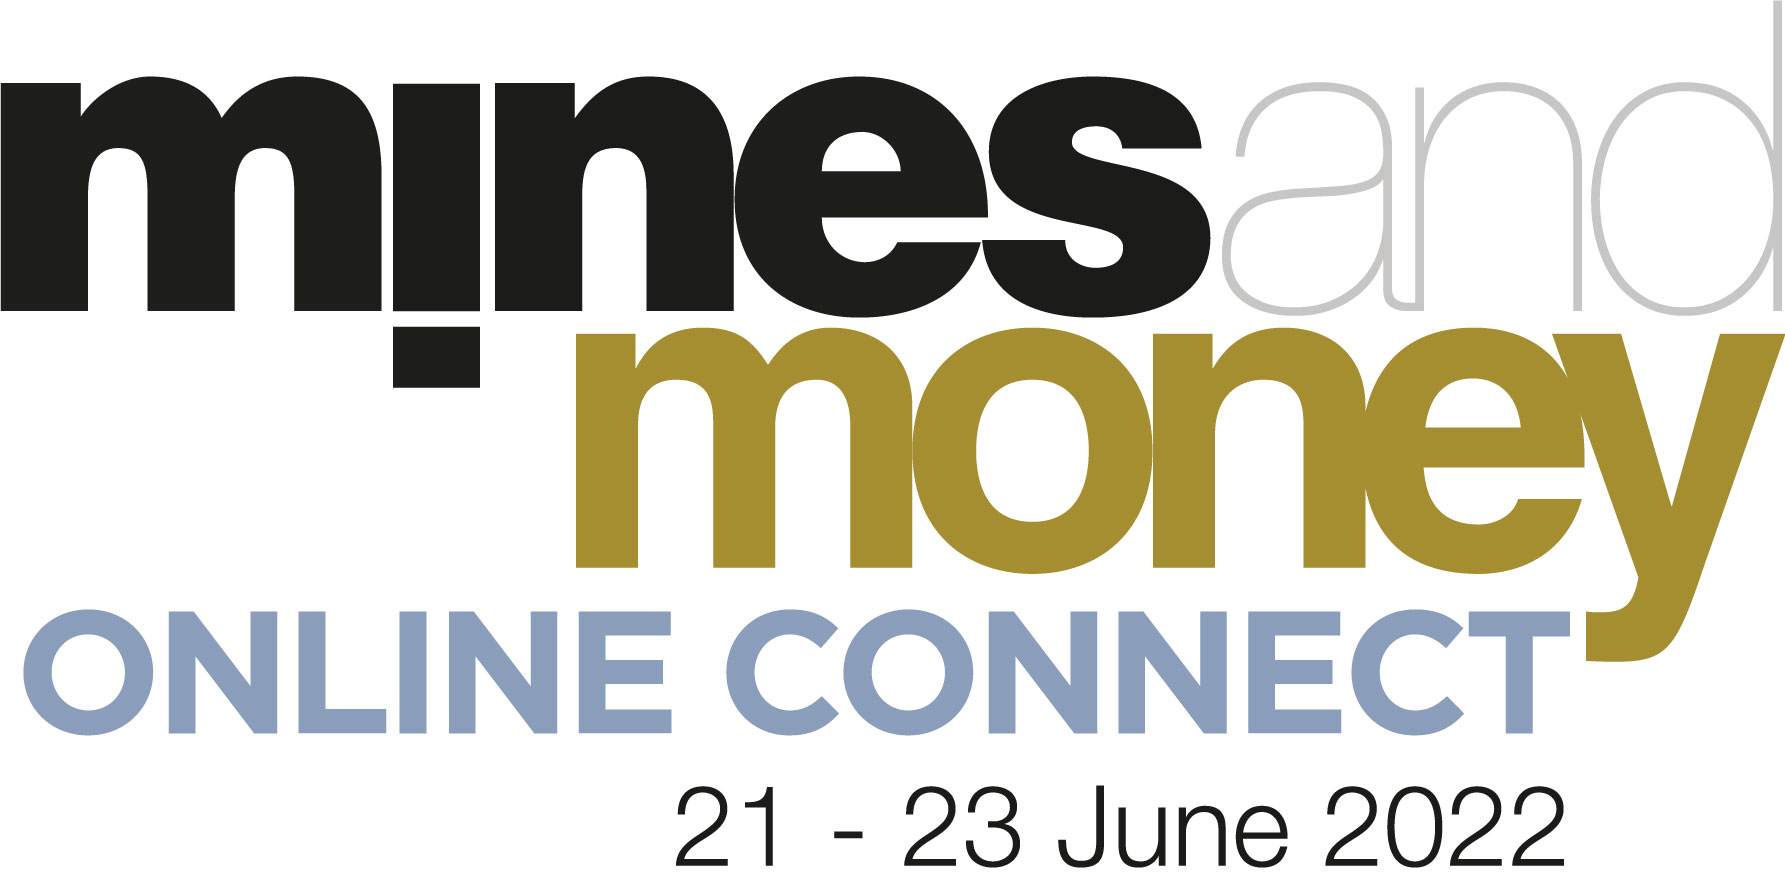 Mines and Money Online Connect - June 2022 organized by Mines and Money